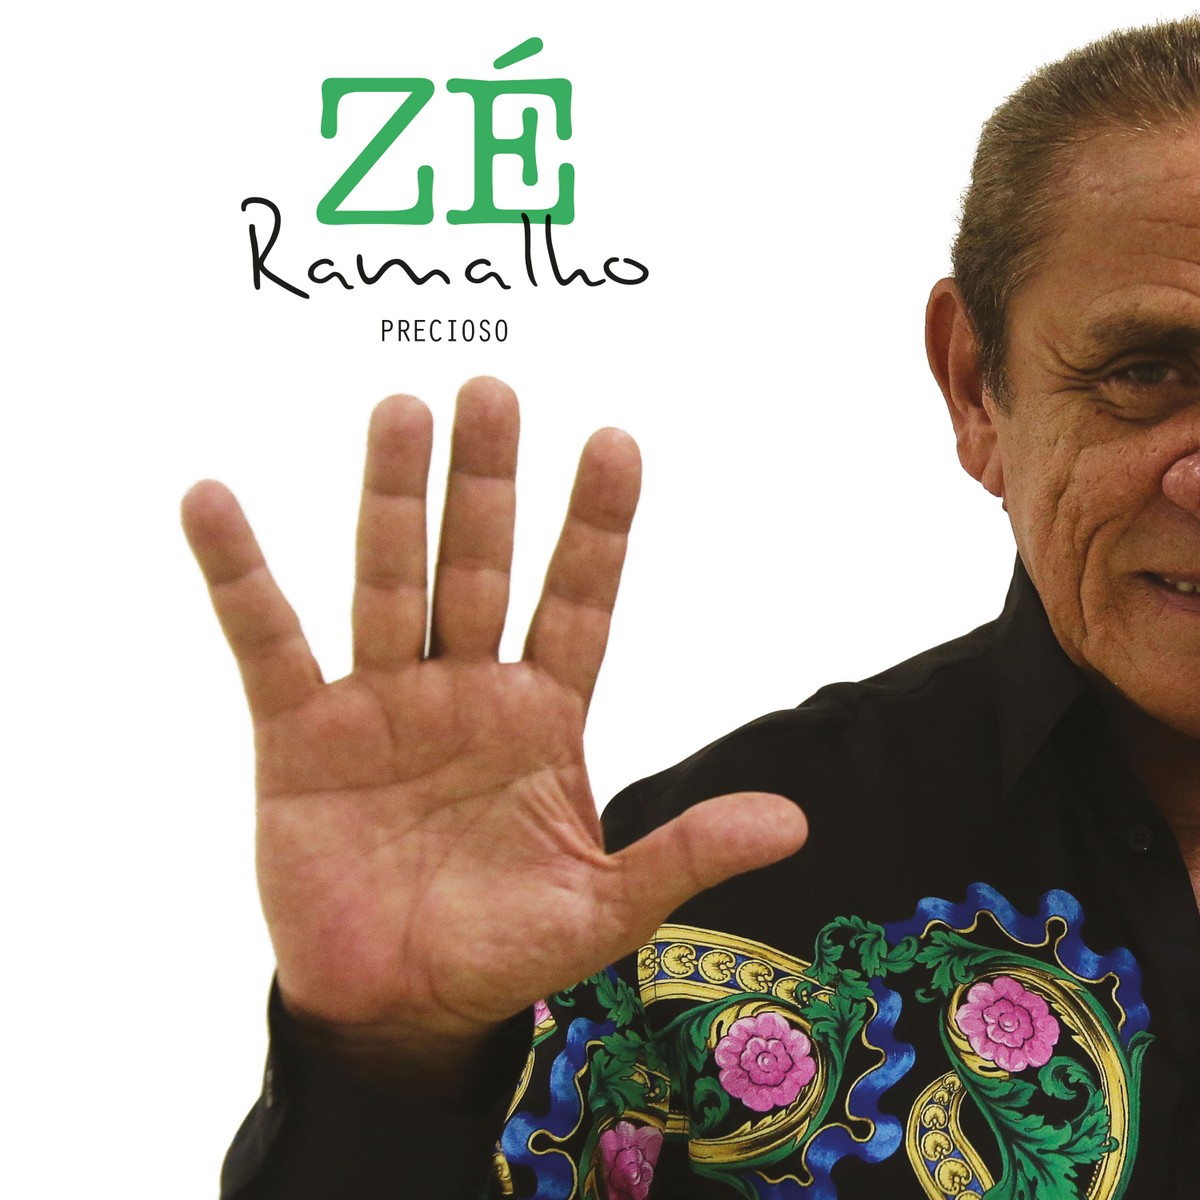 Zé Ramalho sings serenade by Elomar in unpublished recording of the collection 'Precioso' | Mauro Ferreira's blog